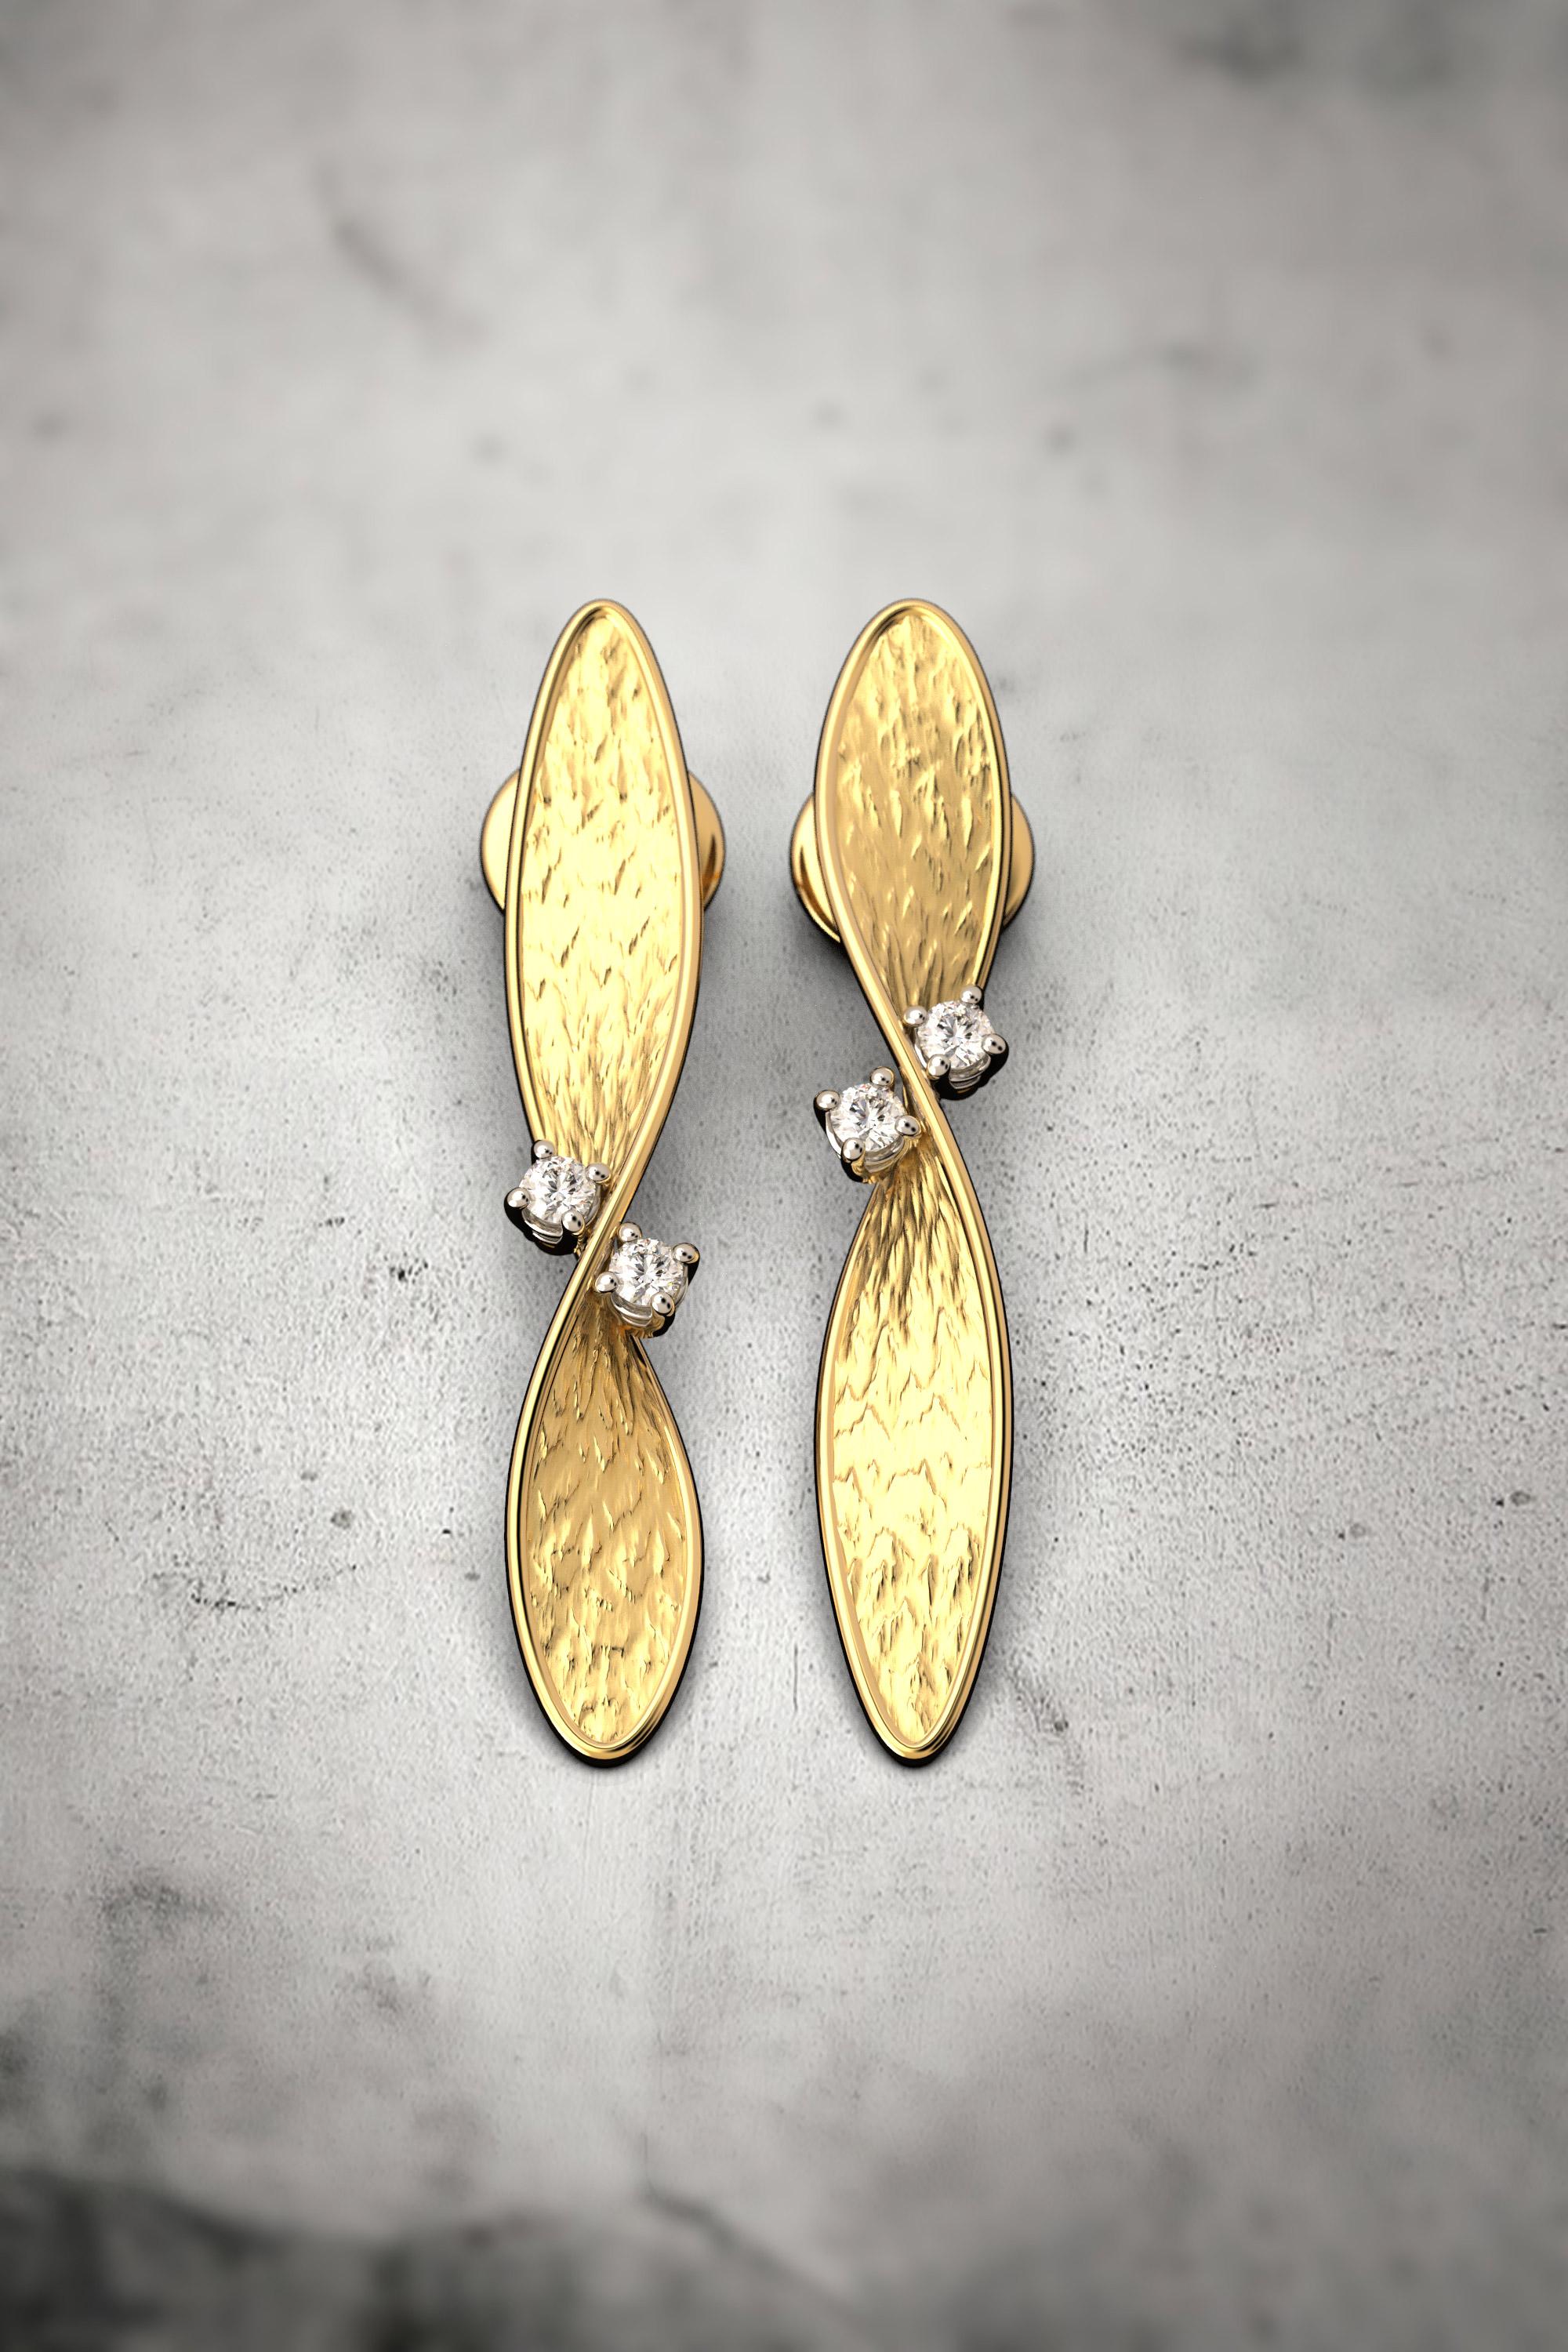 Women's Oltremare Gioielli, Italian Jewelry, 14k Gold Diamond Earrings Made in Italy For Sale